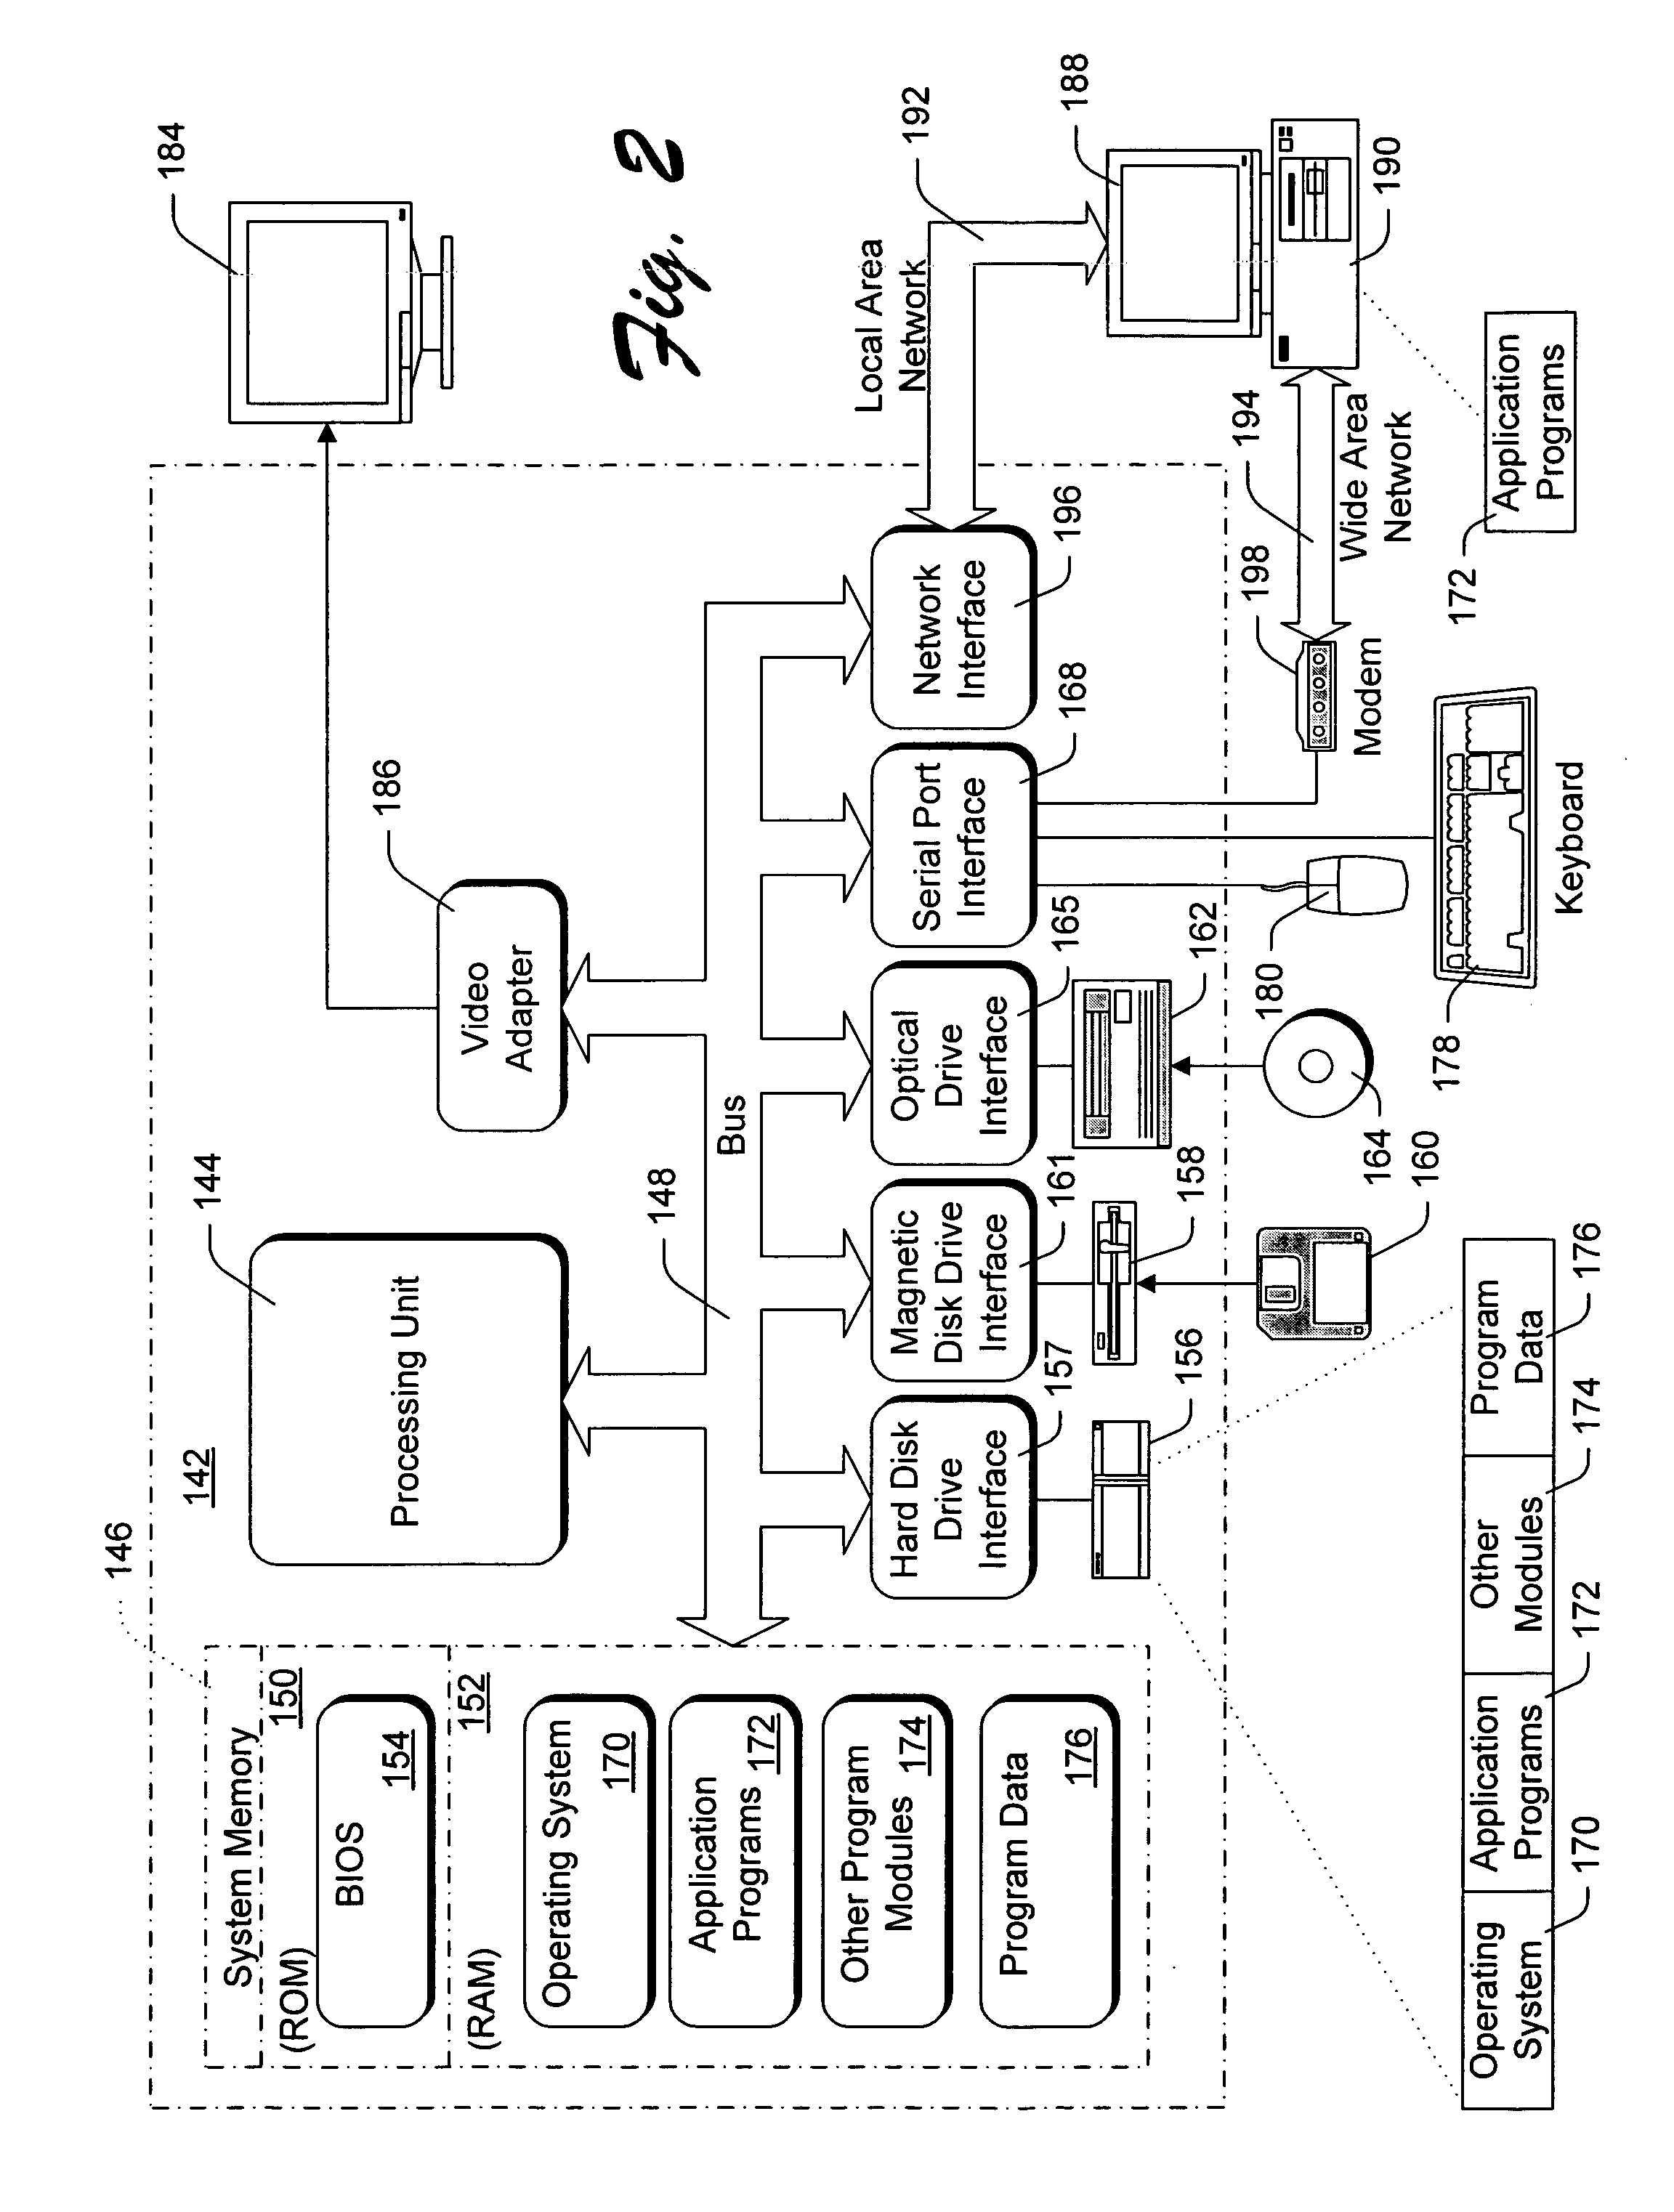 System and method for restricting data transfers and managing software components of distributed computers